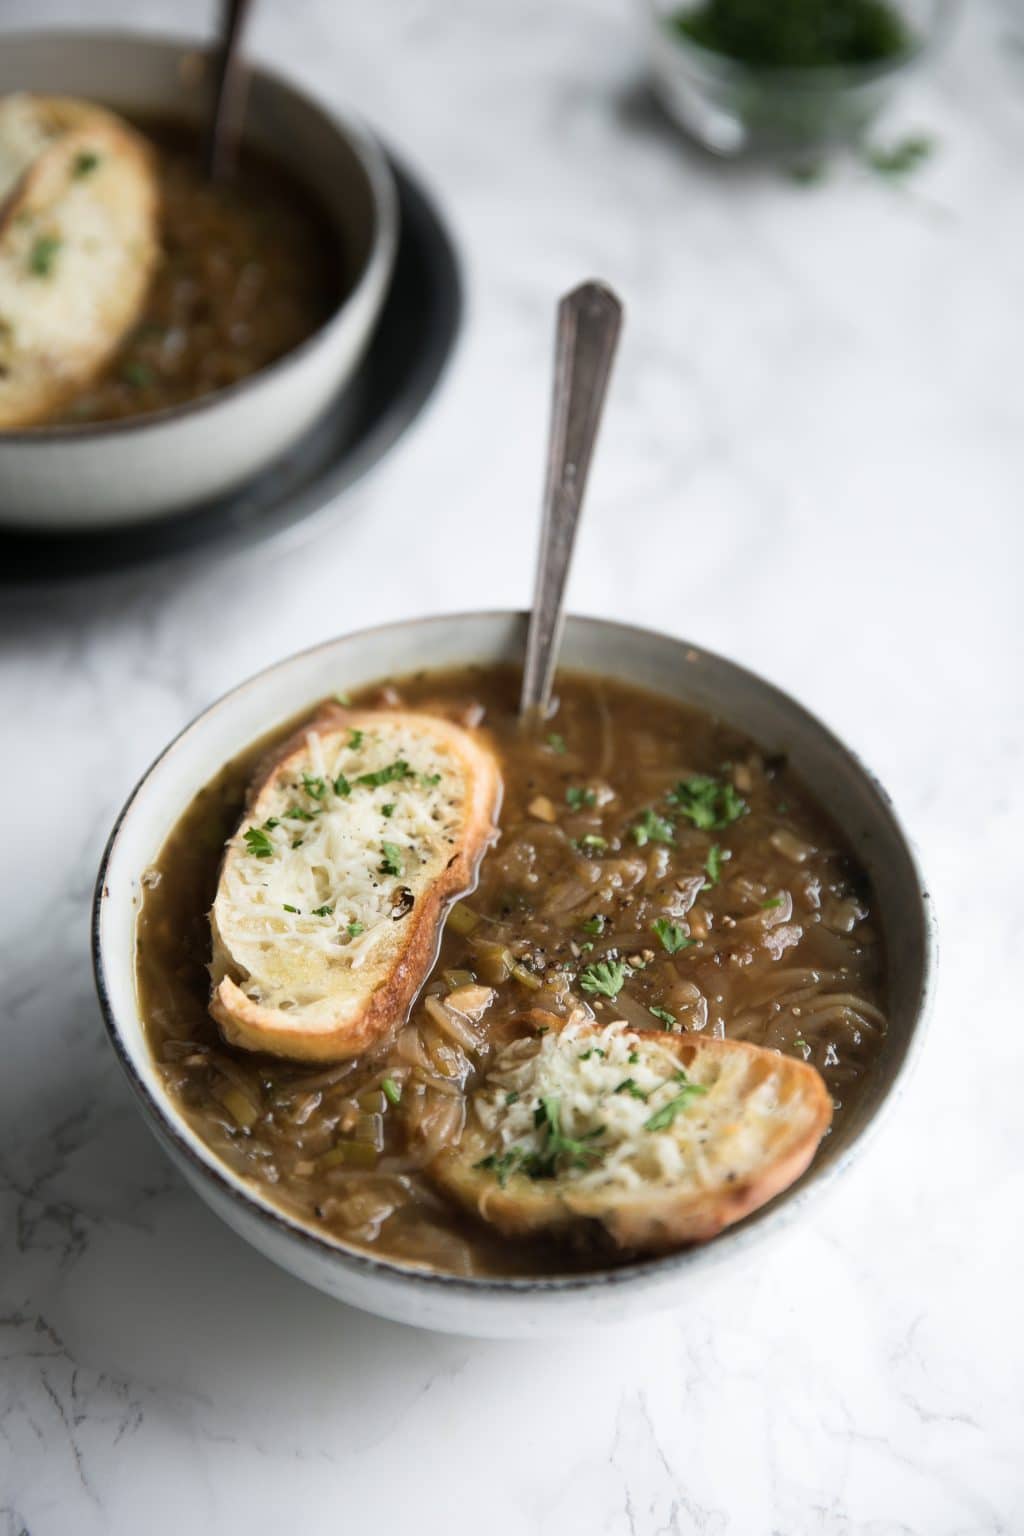 Bowl filled with homemade onion soup made with caramelized onions and topped with crispy parmesan toasts.